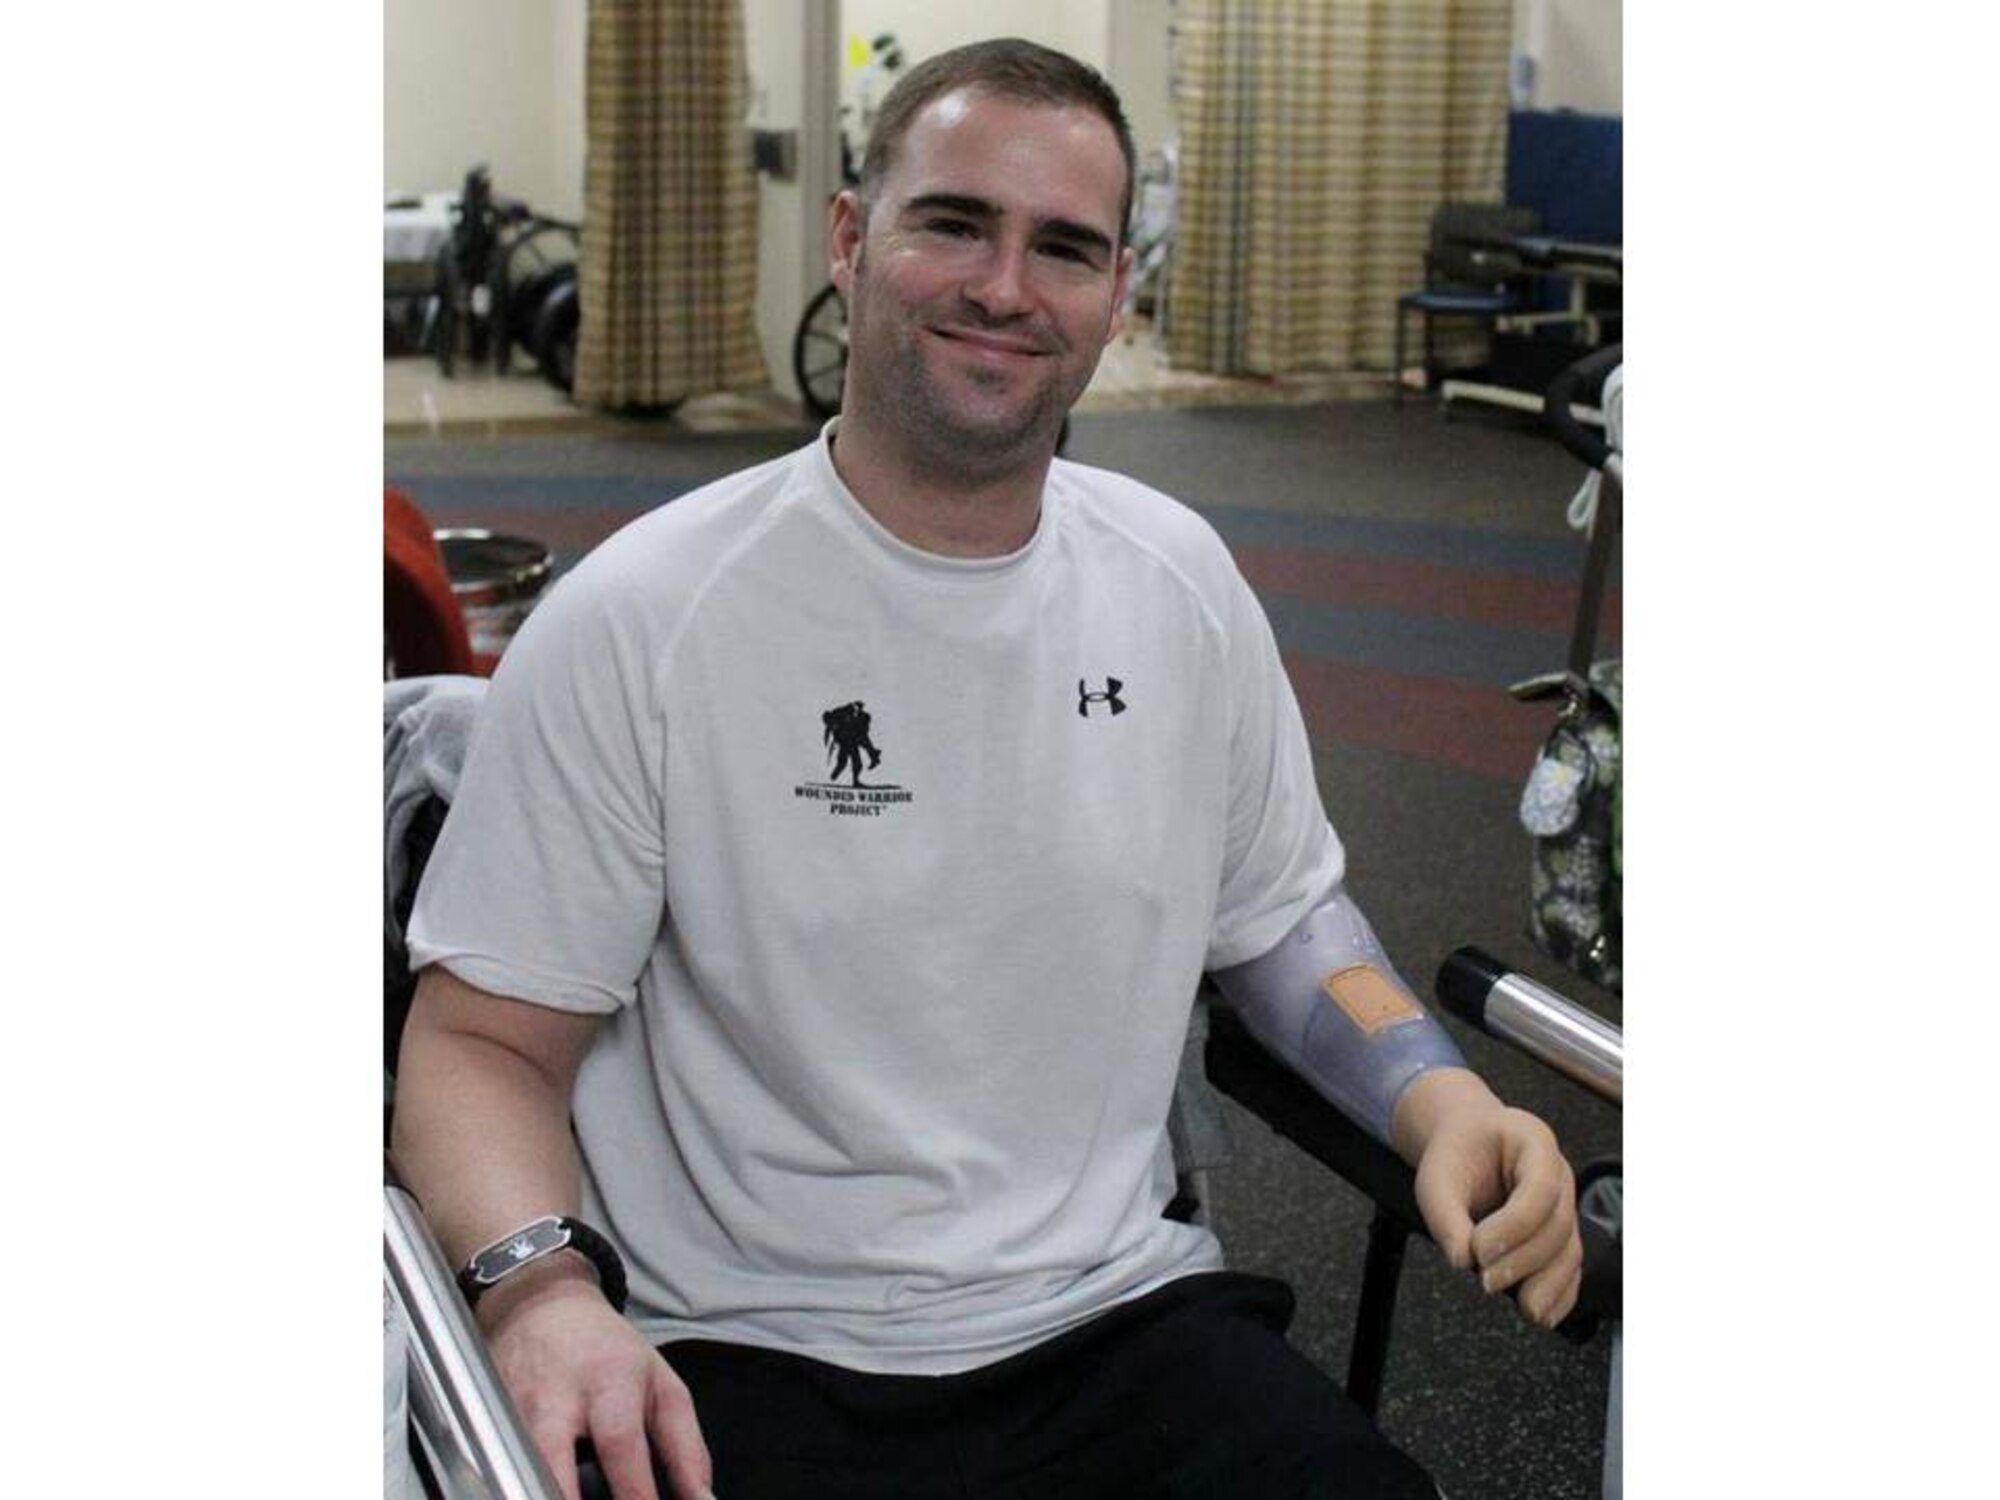 Master Sgt. Joseph Deslauriers, Air Force Special Operations Command explosive ordnance device program manager, smiles with his new prosthetic arm.
(Photo courtesy of Building Homes for Heroes) 